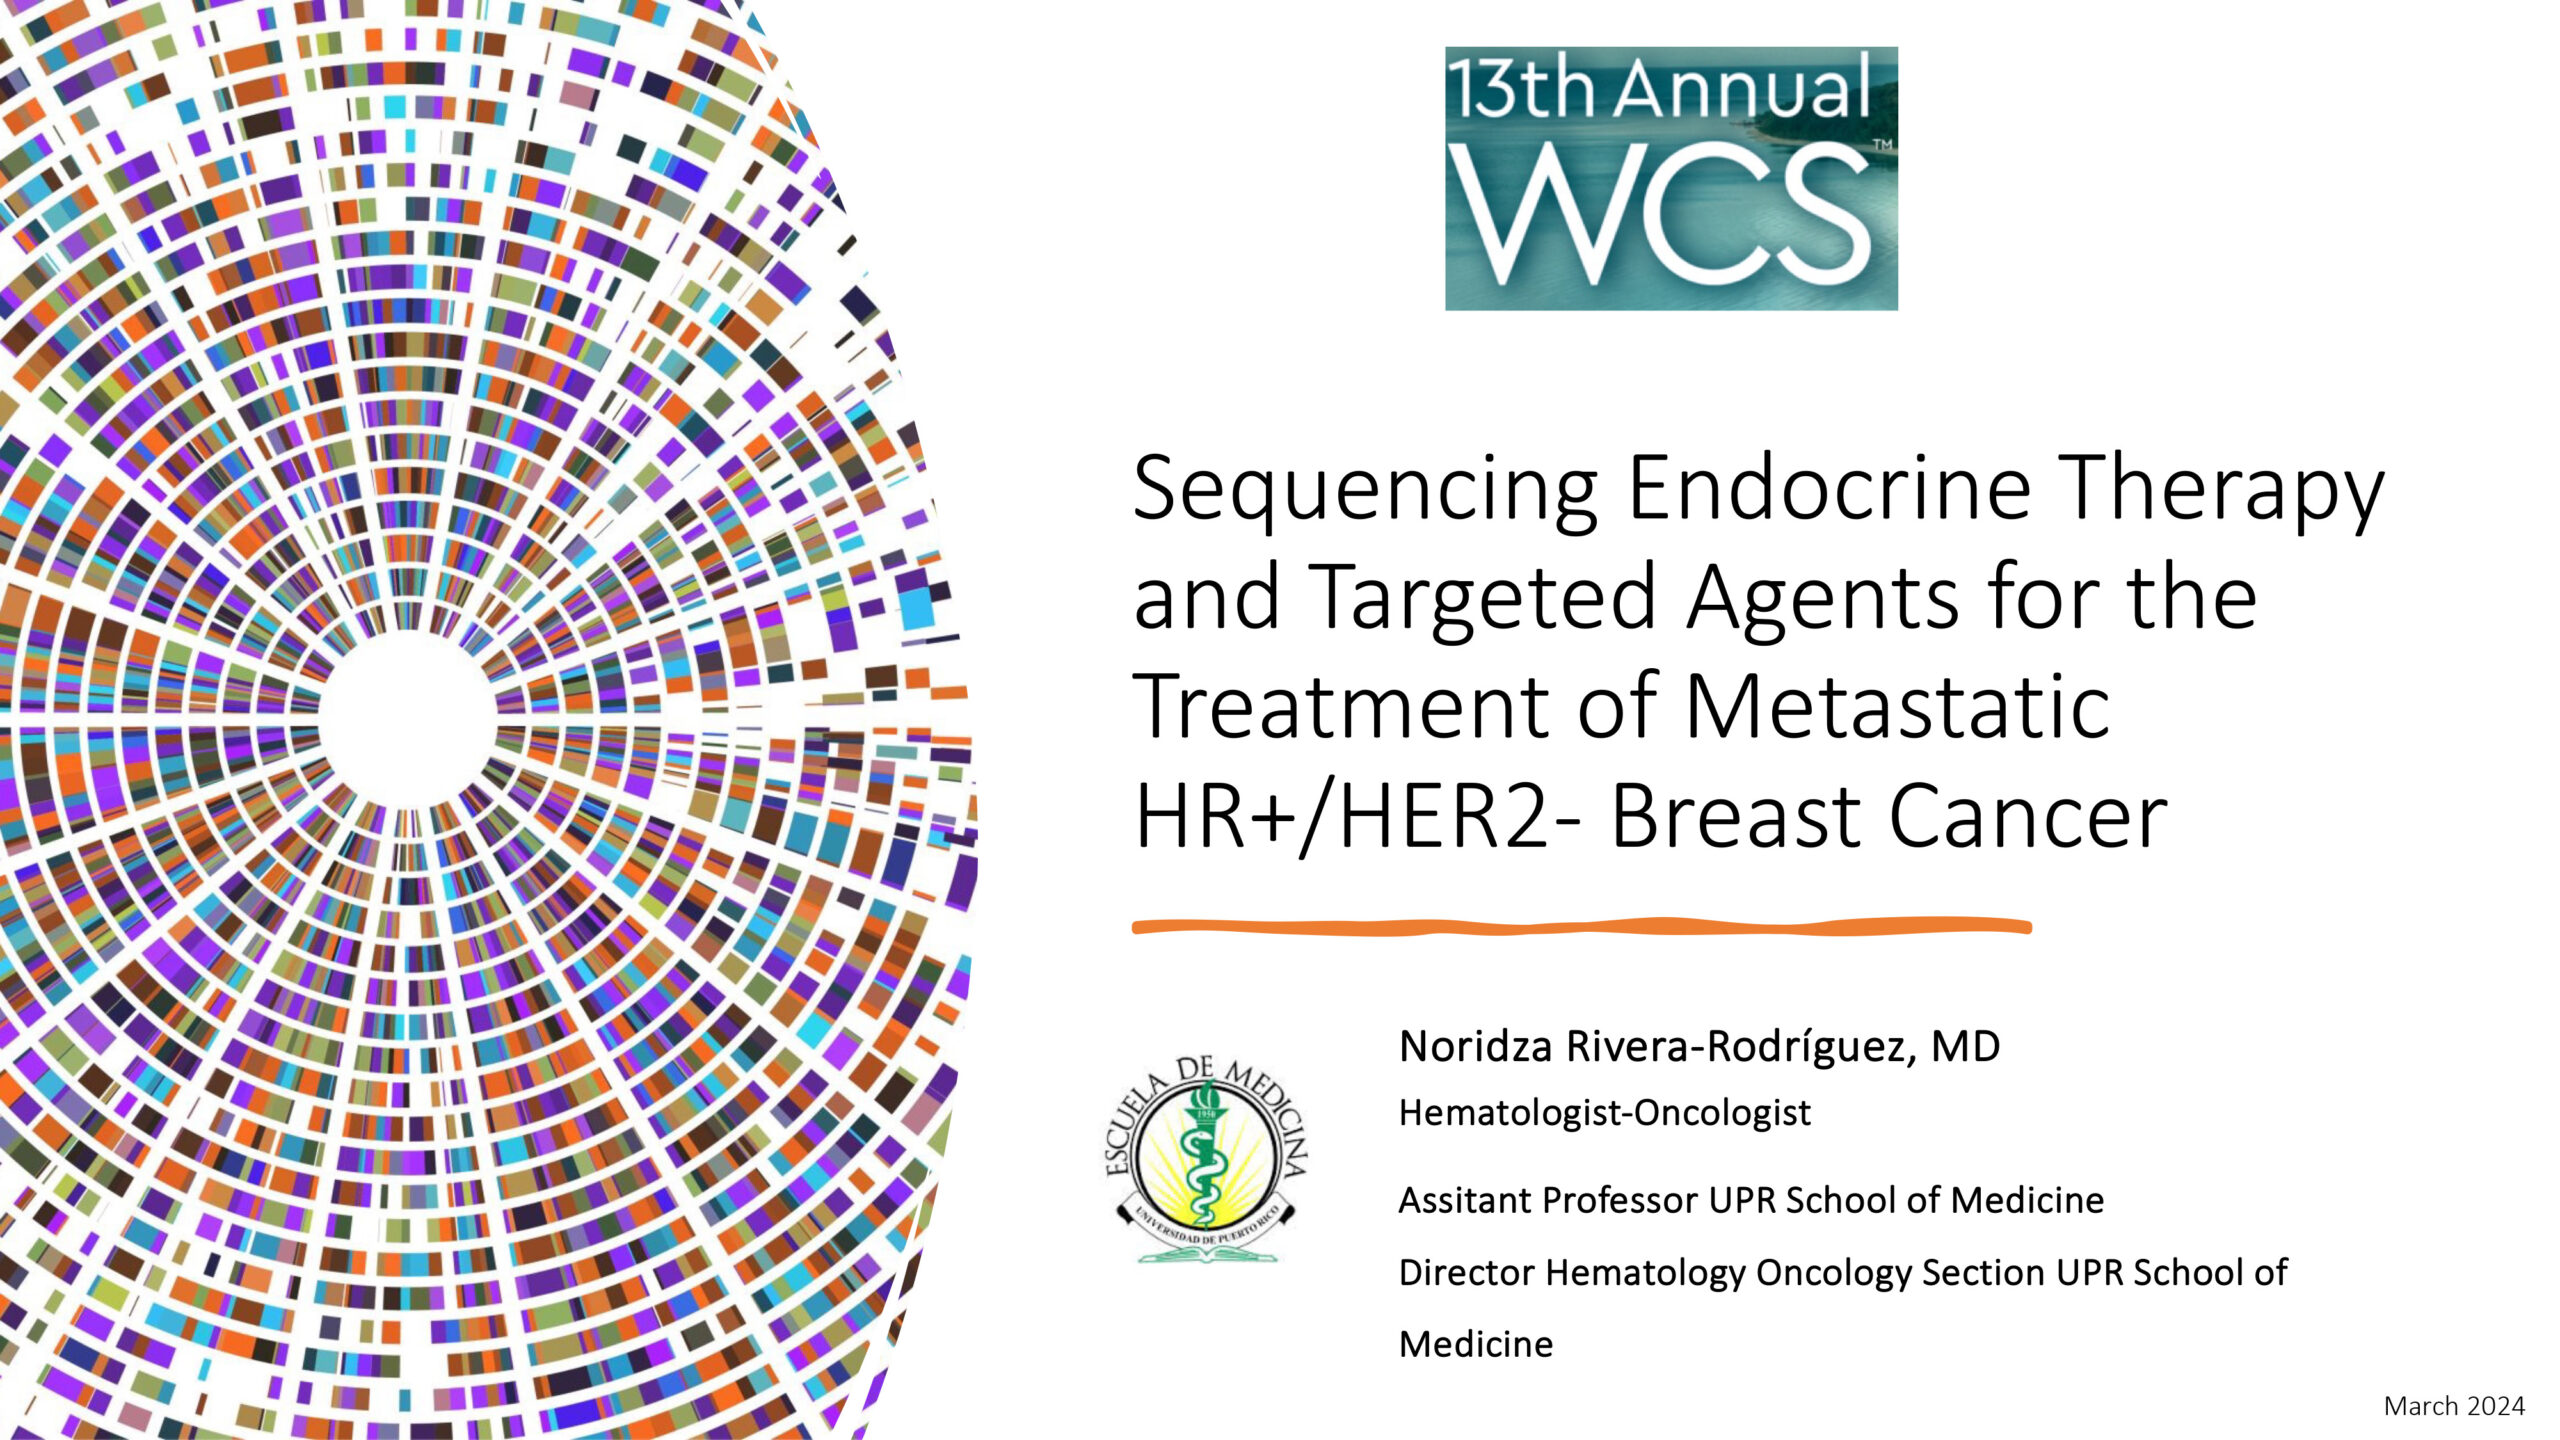 Sequencing Endocrine Therapy and Targeted Agents for the Treatment of Metastatic HR+/HER2- Breast Cancer